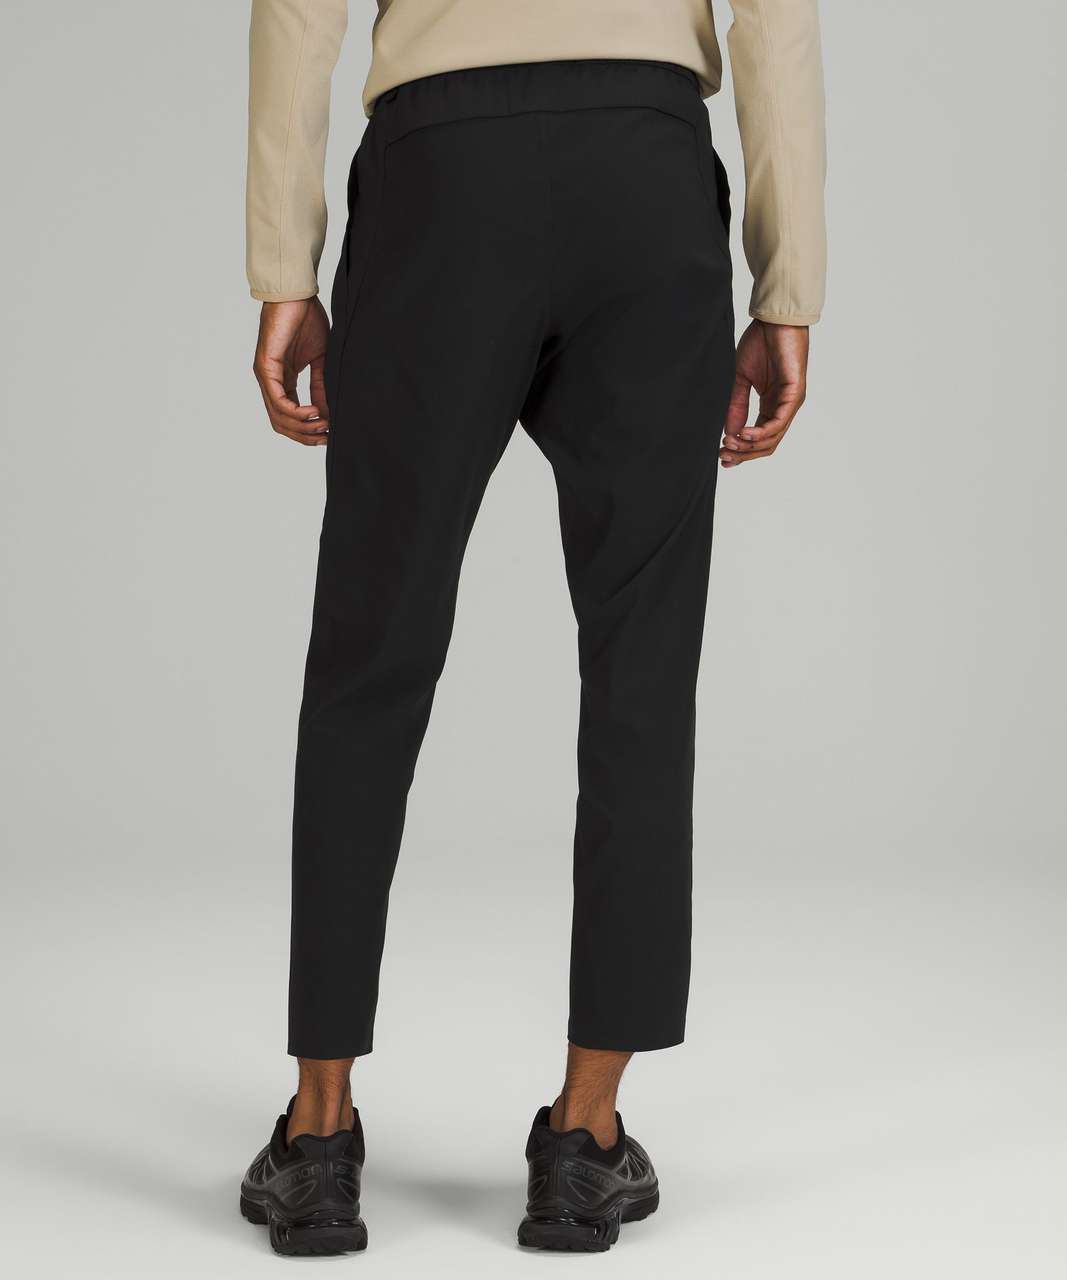 Pants Similar To Lululemon For Men  International Society of Precision  Agriculture